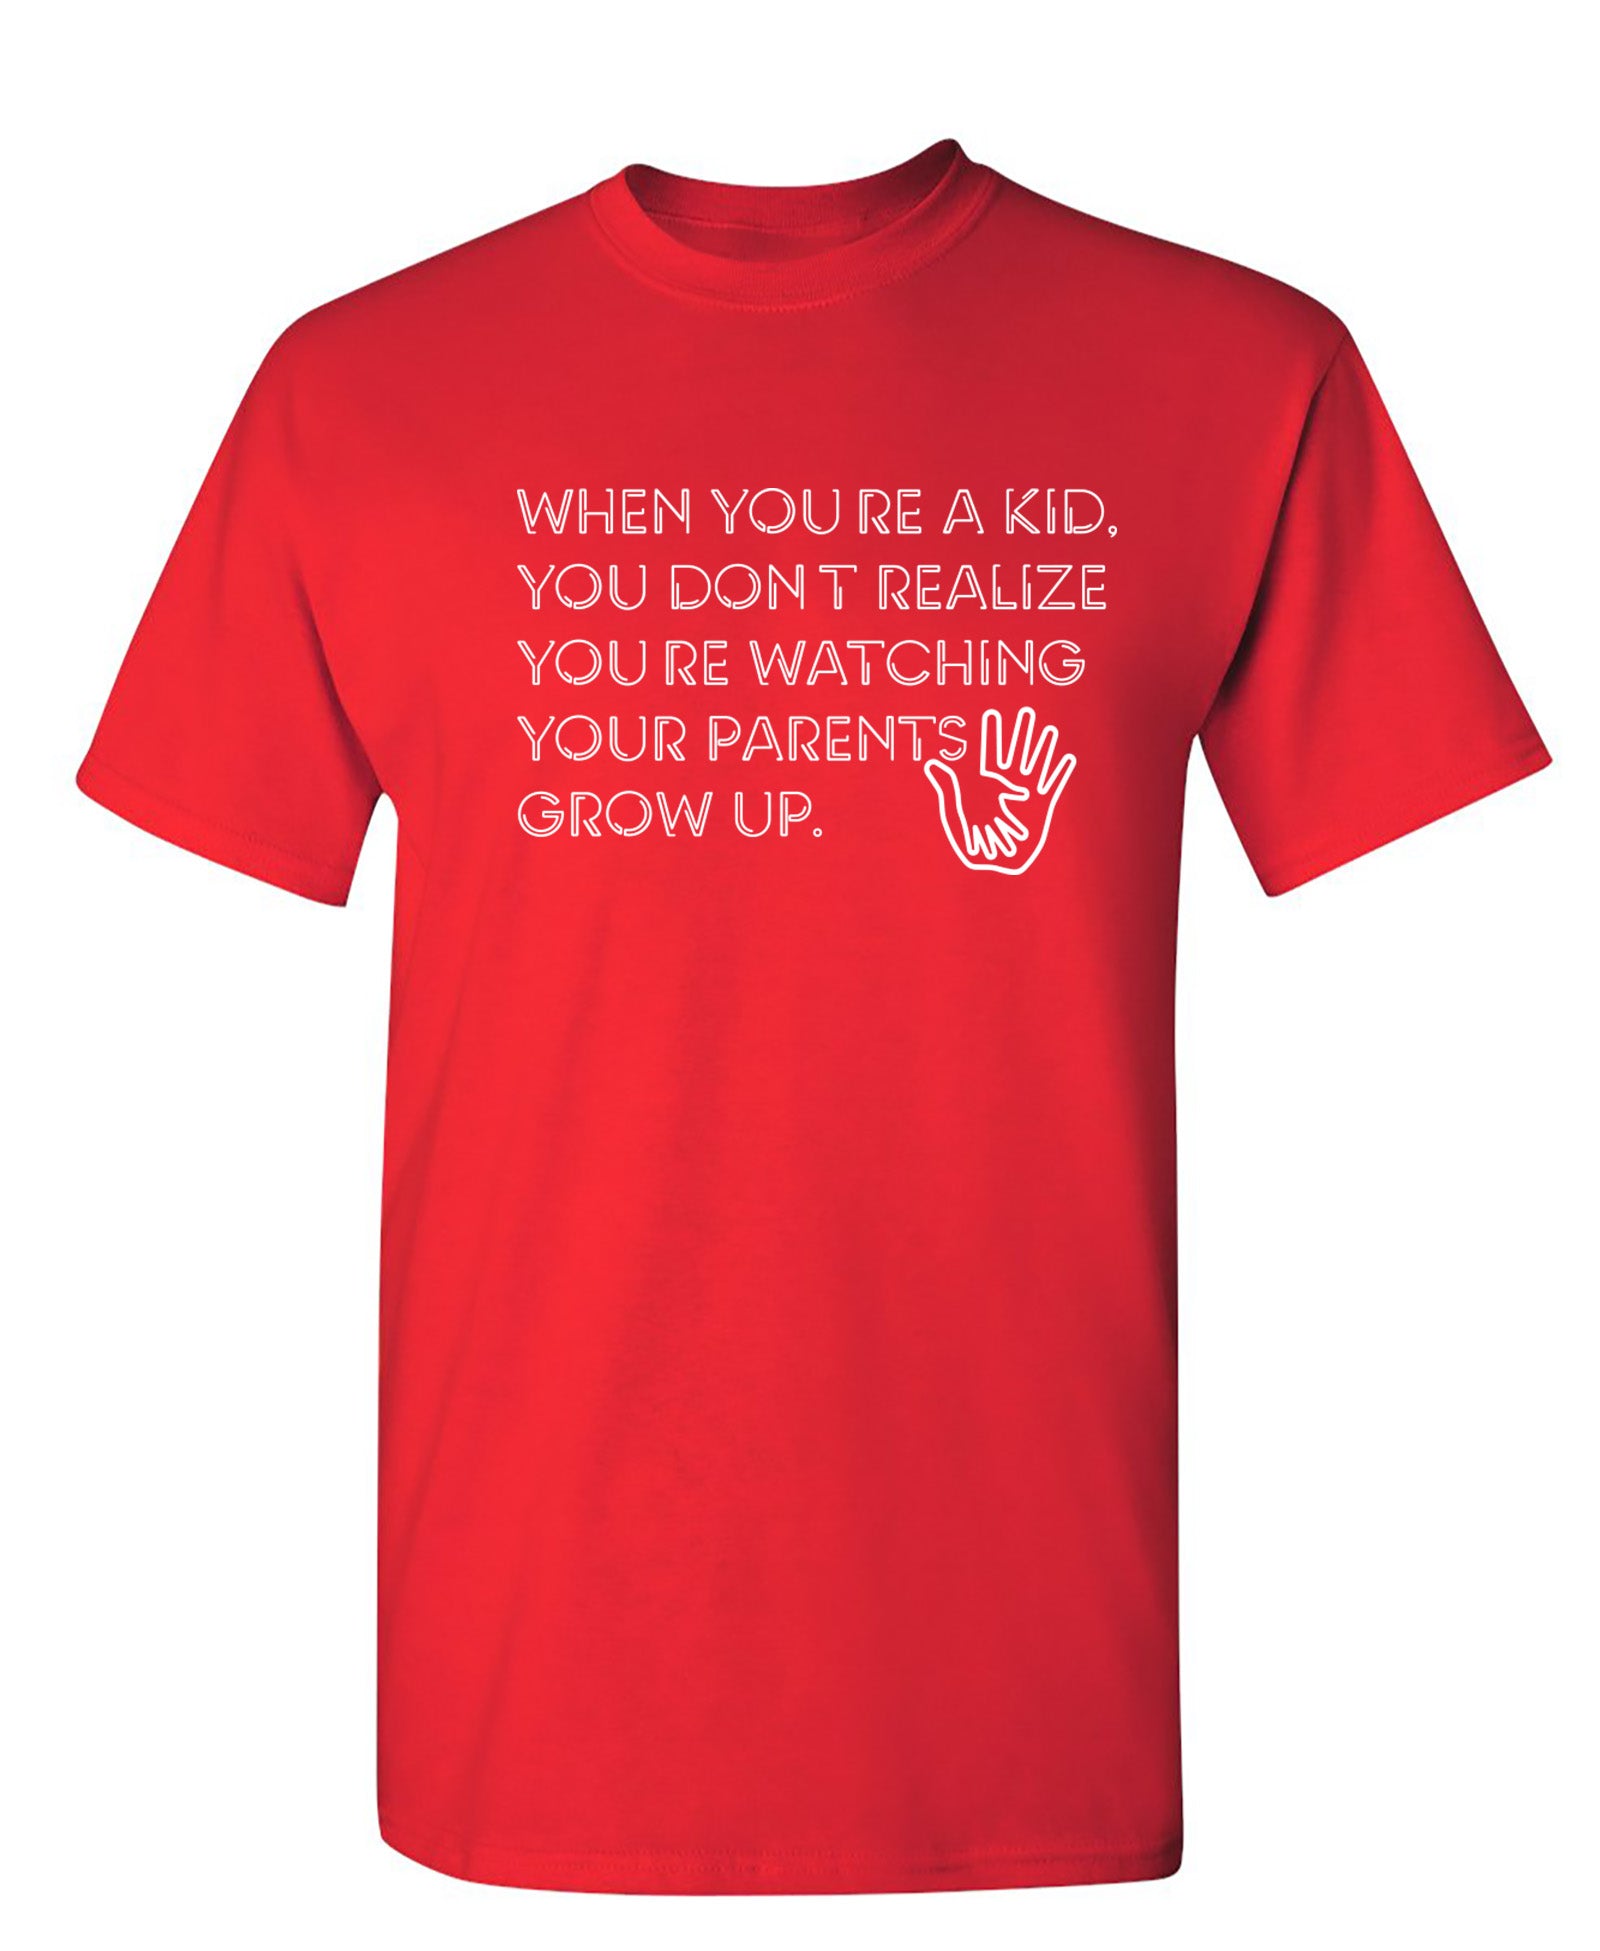 You Don't Realize Your Parents Grow Up - Funny T Shirts & Graphic Tees